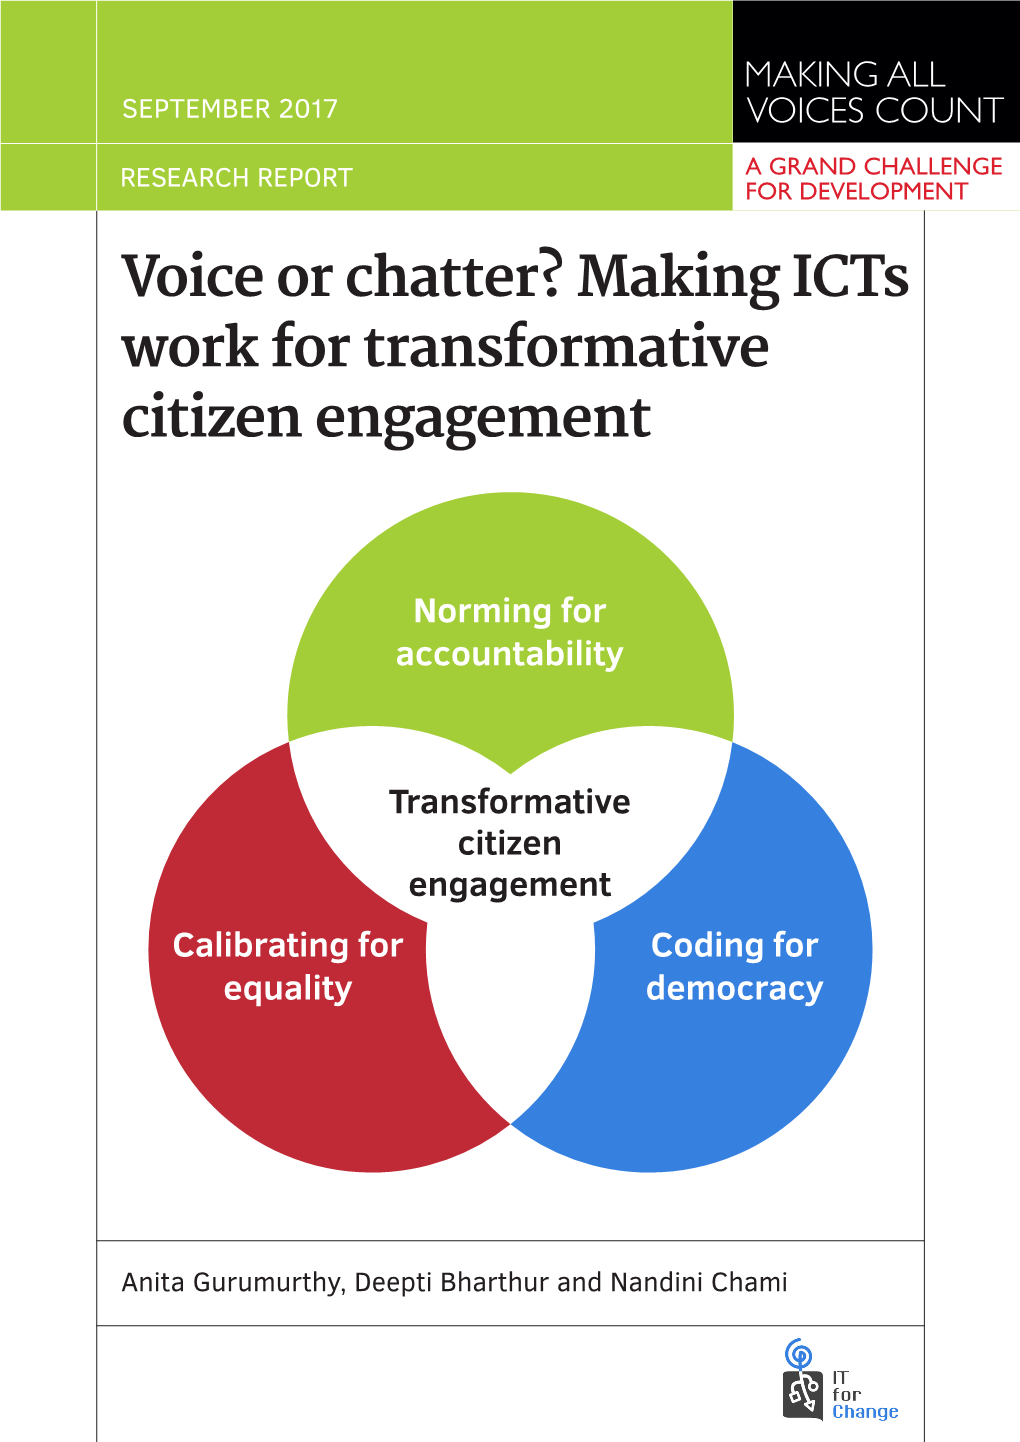 Voice Or Chatter? Making Icts Work for Transformative Citizen Engagement